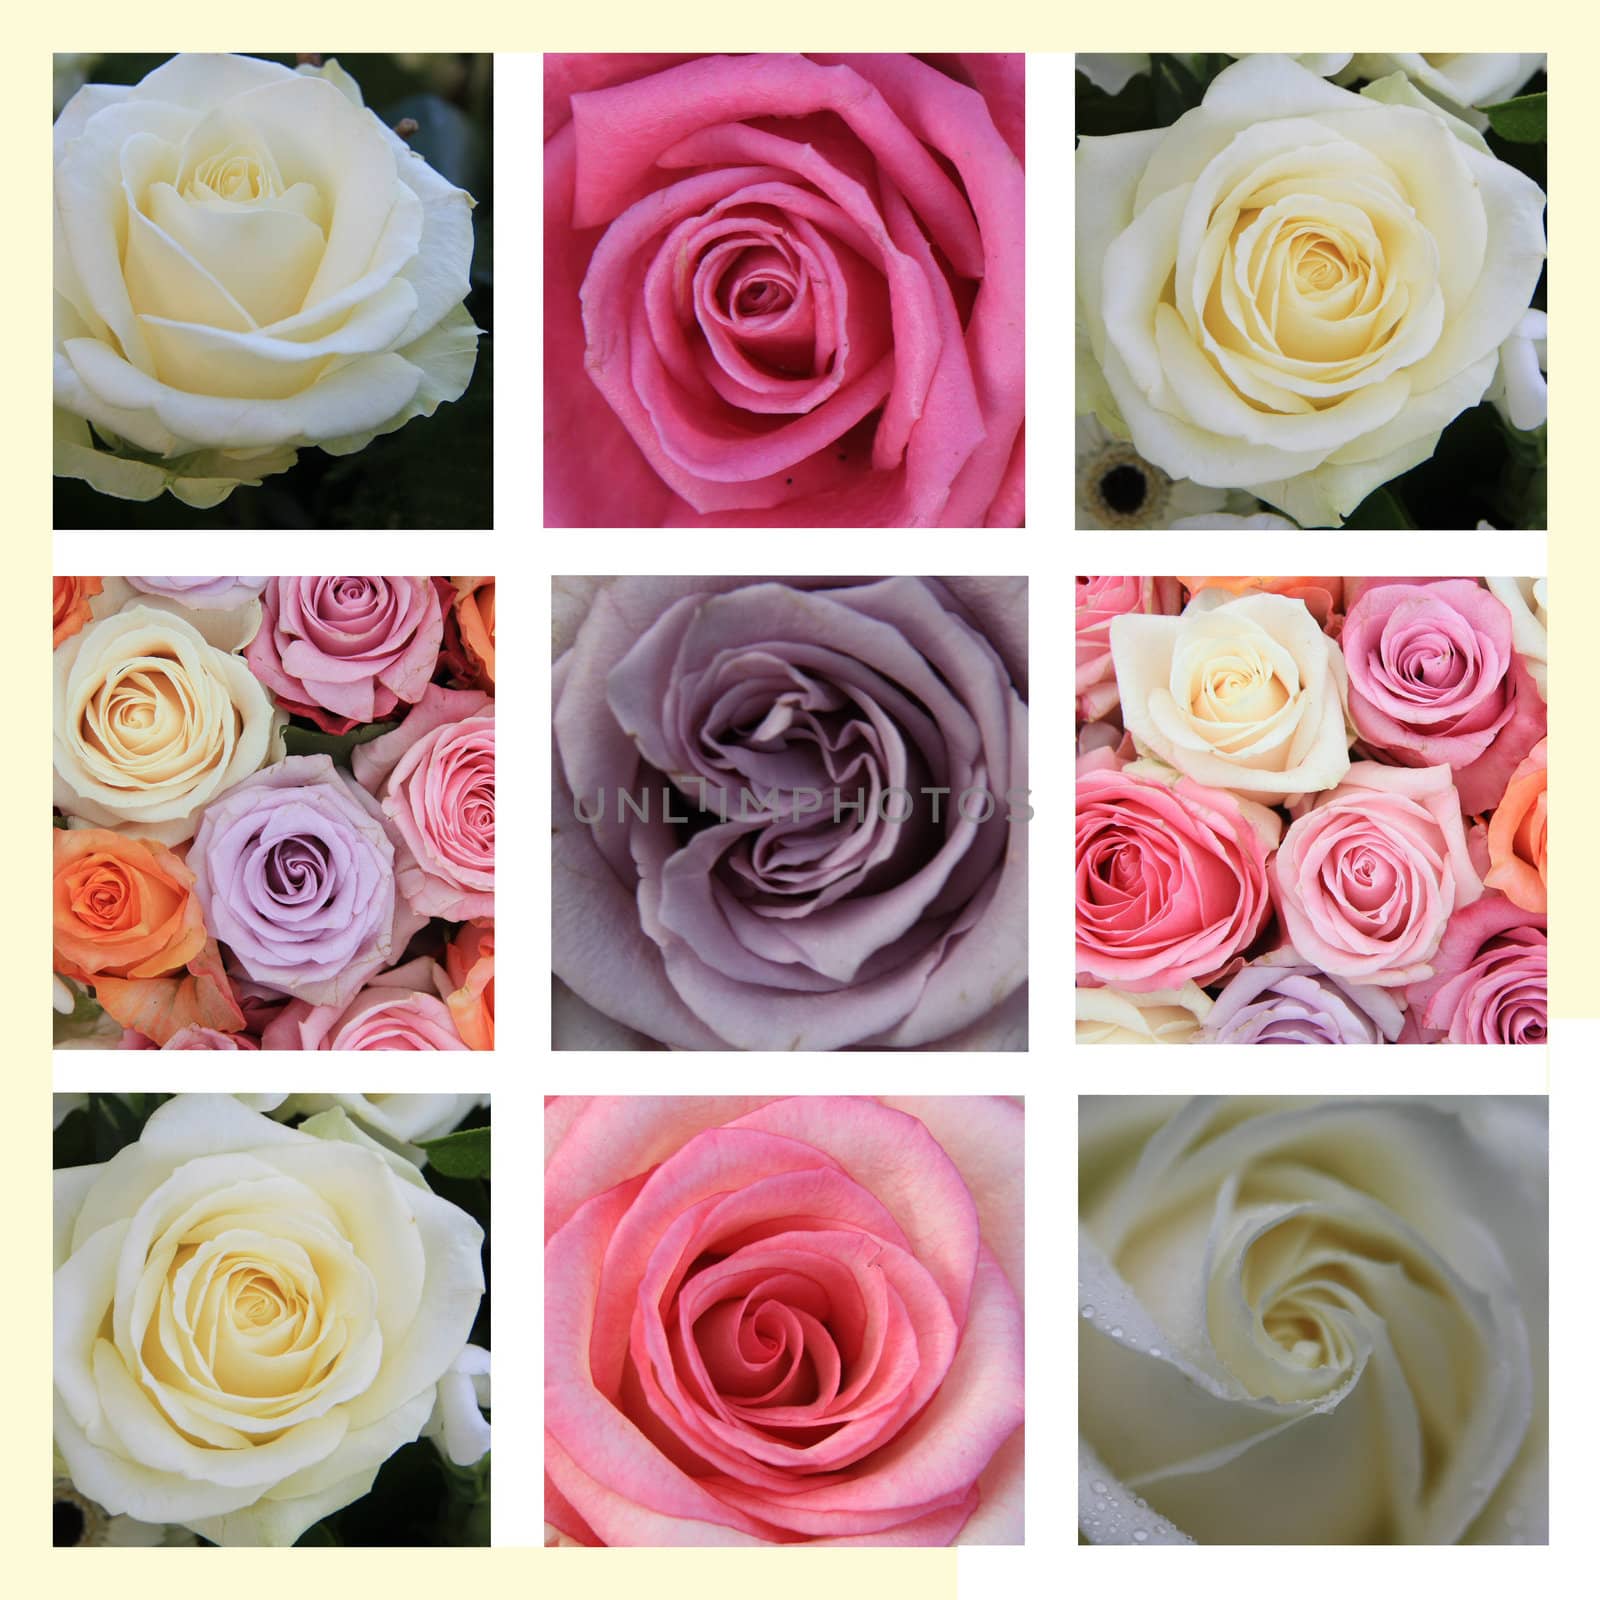 Pastel rose collage by studioportosabbia